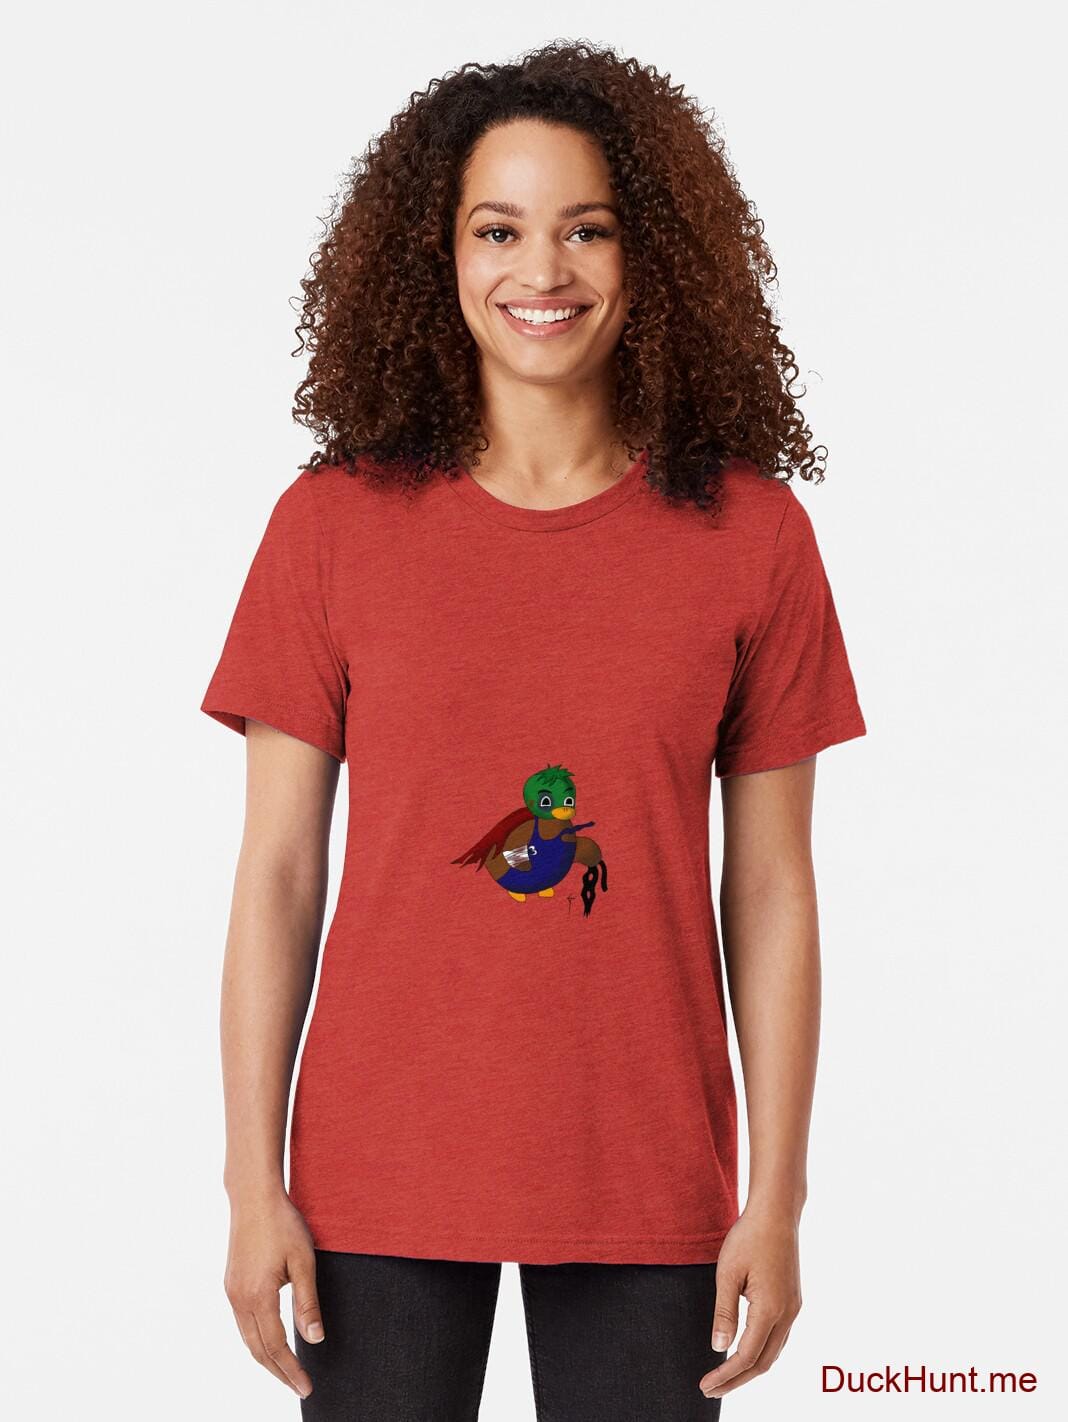 Dead DuckHunt Boss (smokeless) Red Tri-blend T-Shirt (Front printed) alternative image 1